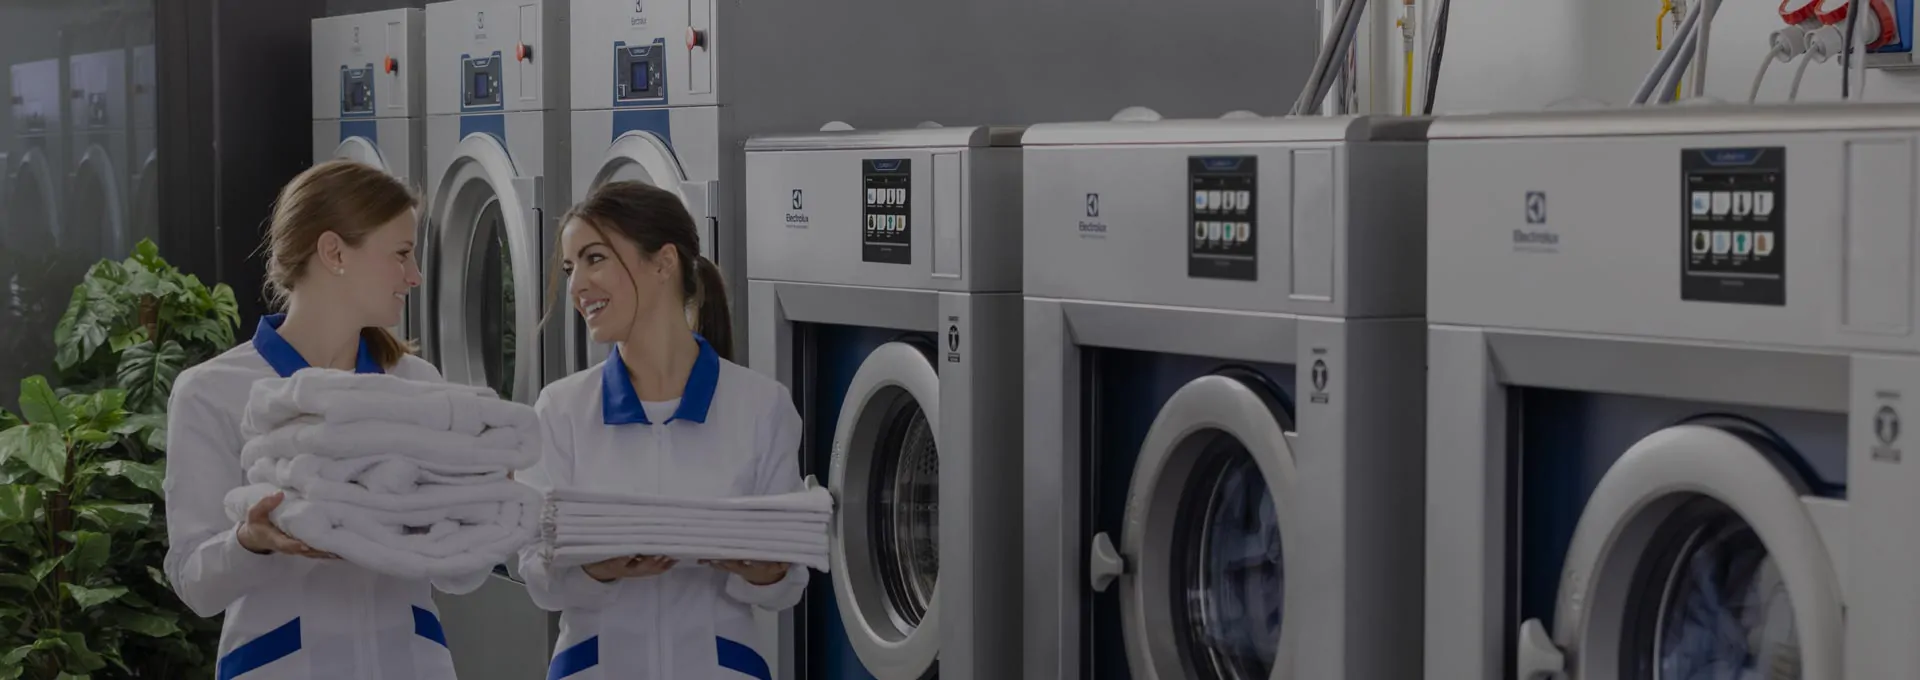 Laundry staff carrying towels in front of commercial washer and dryer